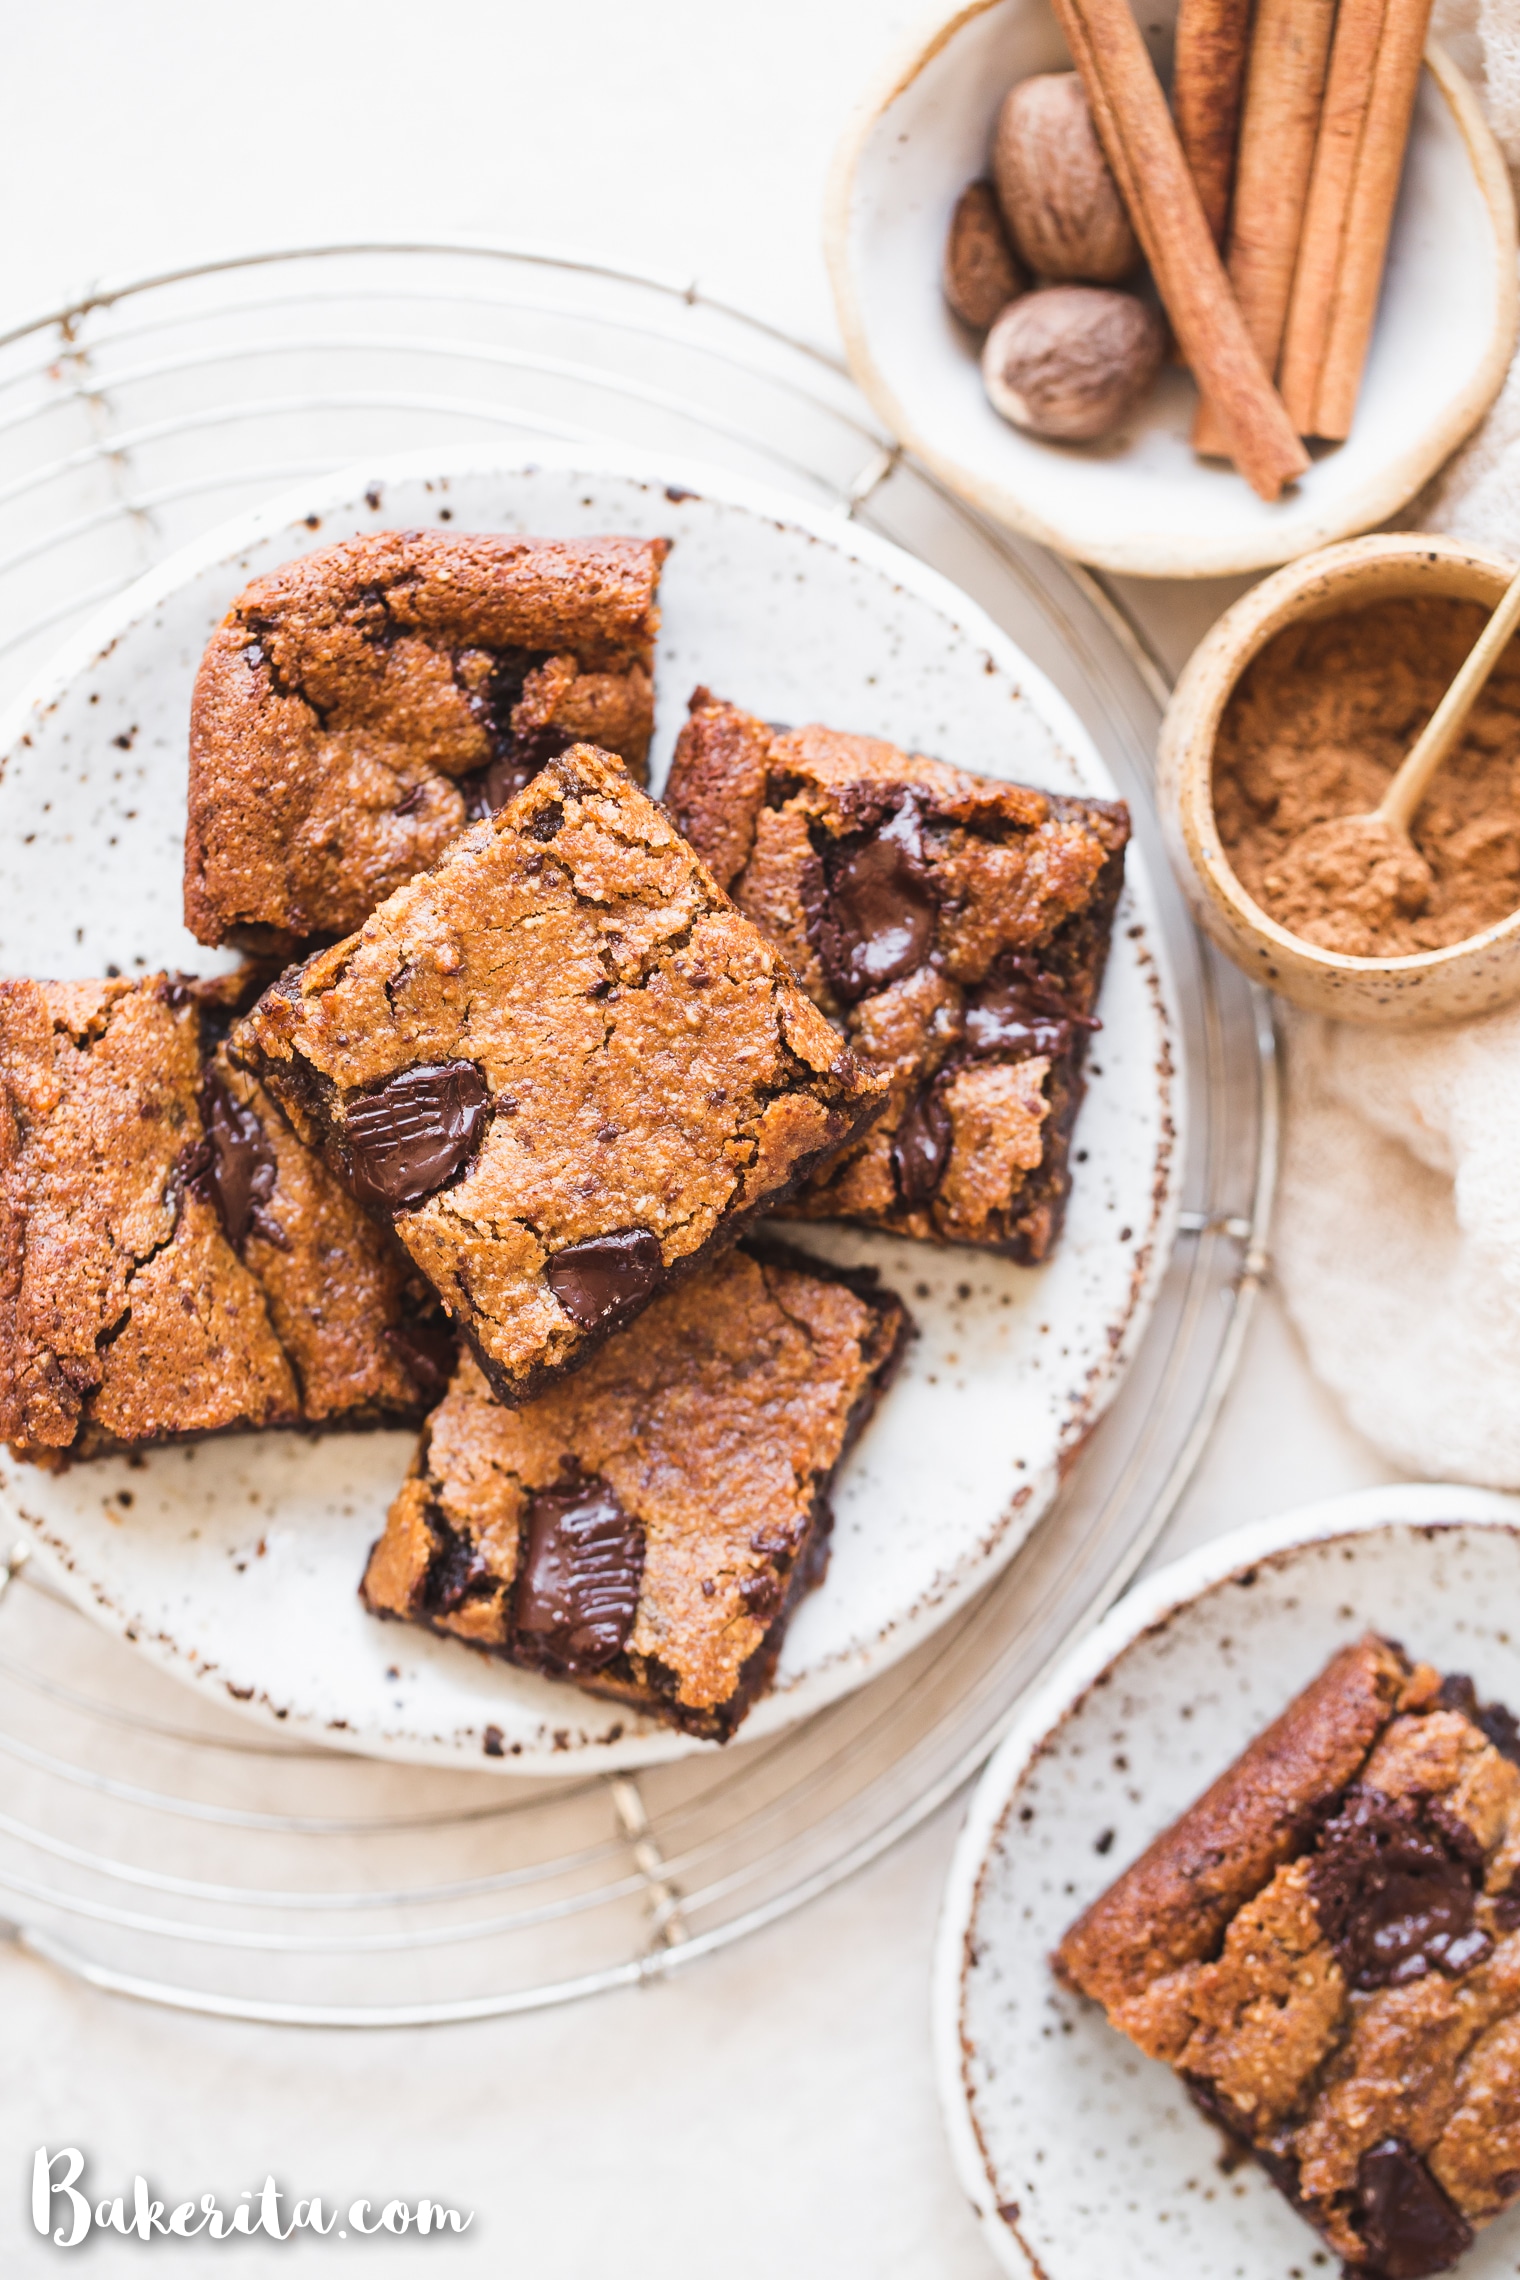 These Gluten-Free Vegan Sweet Potato Blondies taste like fall in a bar cookie! With warm spices and dark chocolate chunks, these decadent blondies will satisfy your fall dessert cravings.